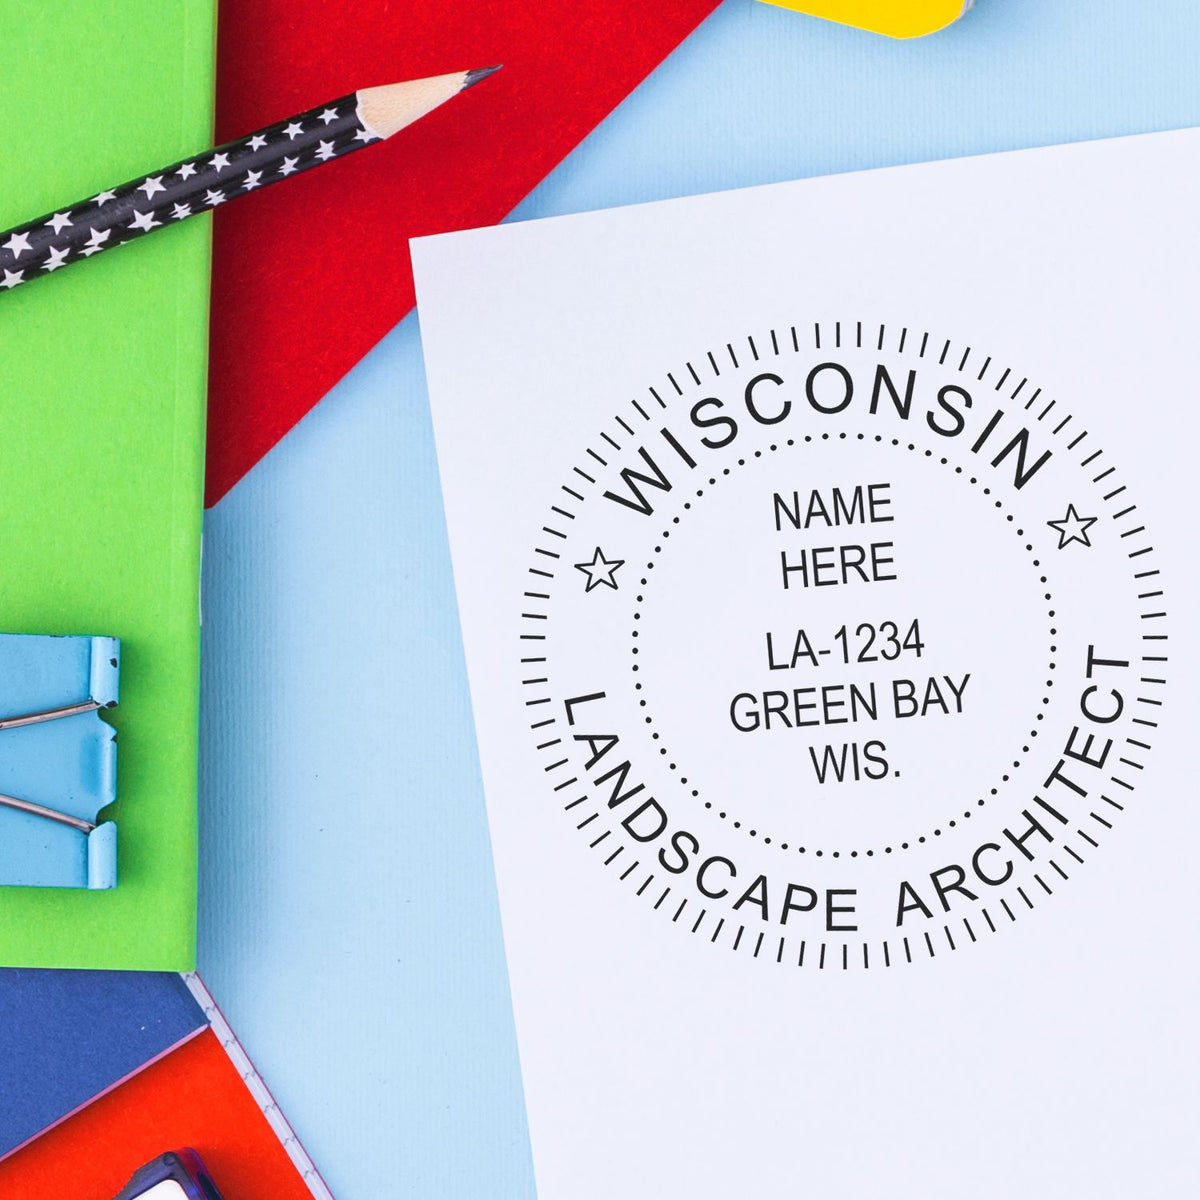 This paper is stamped with a sample imprint of the Slim Pre-Inked Wisconsin Landscape Architect Seal Stamp, signifying its quality and reliability.